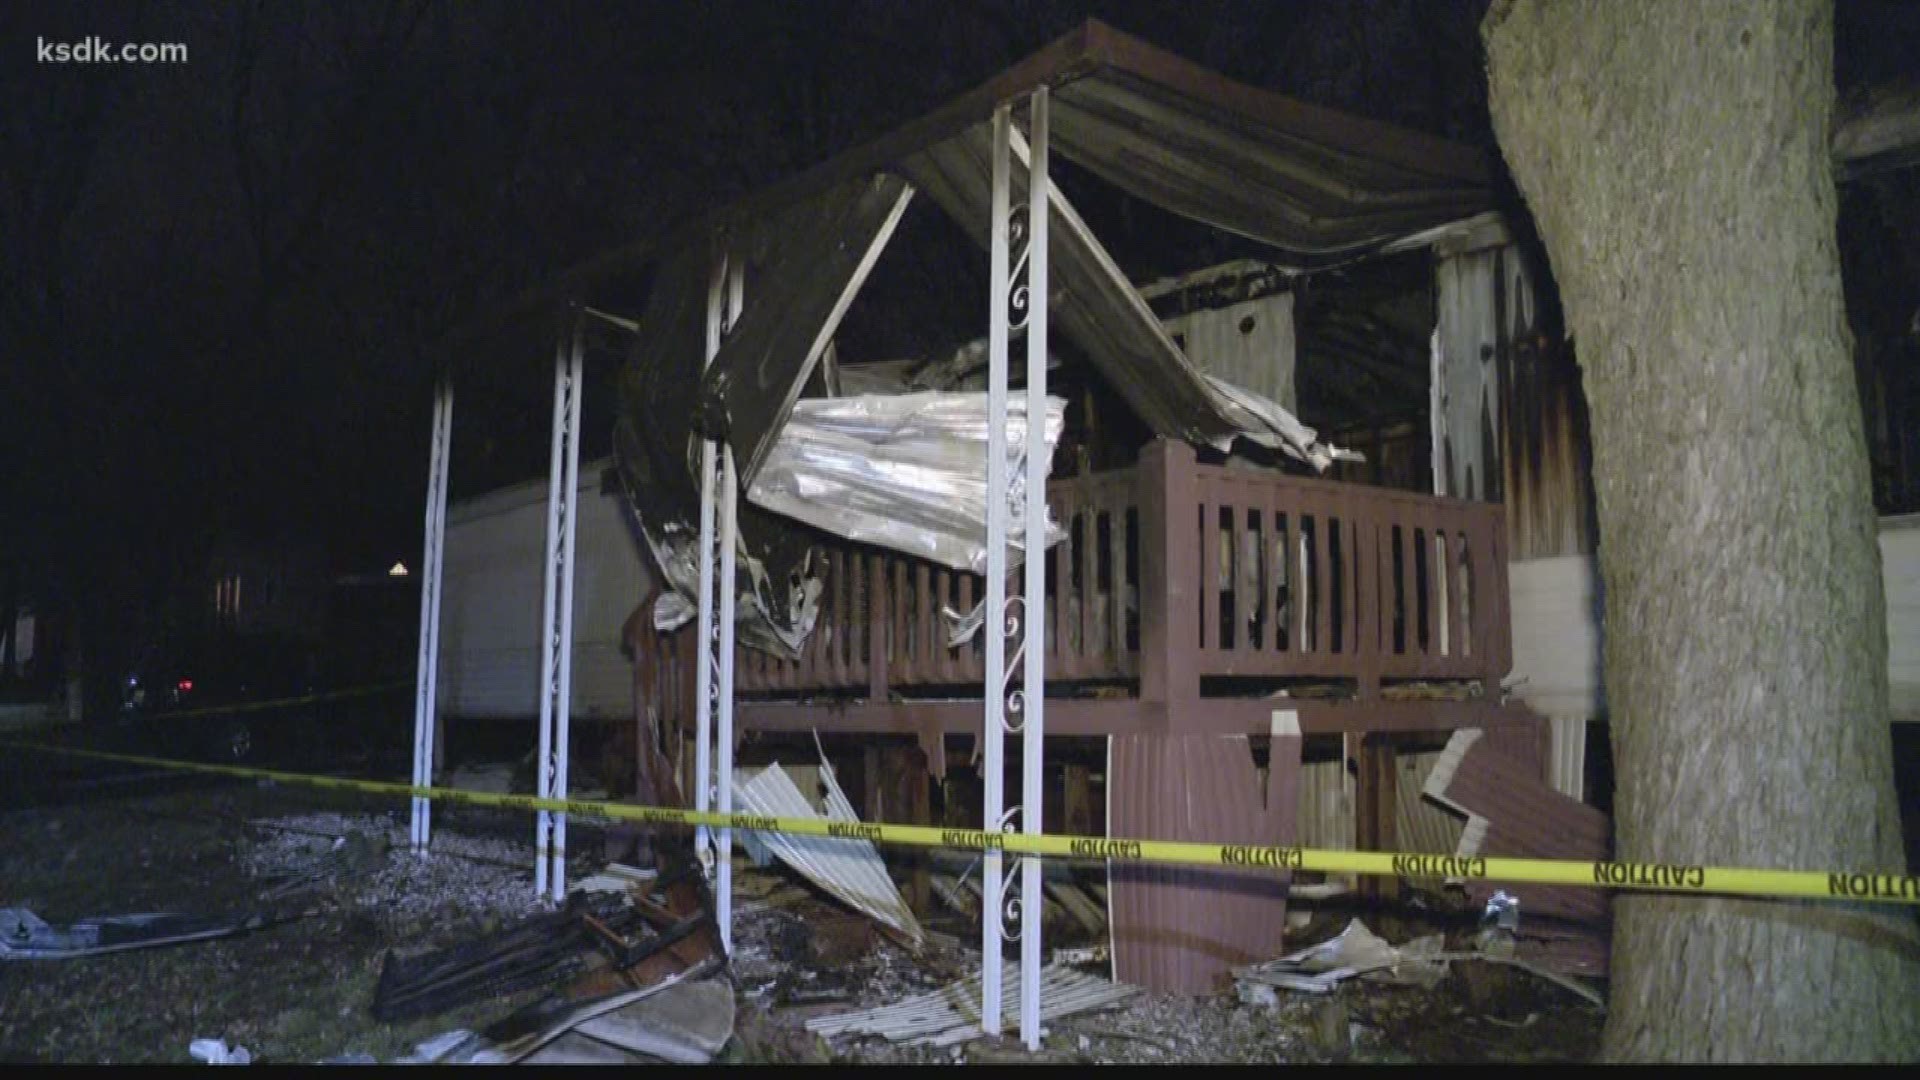 "I would say they're really lucky to be alive absolutely," one neighbor said.